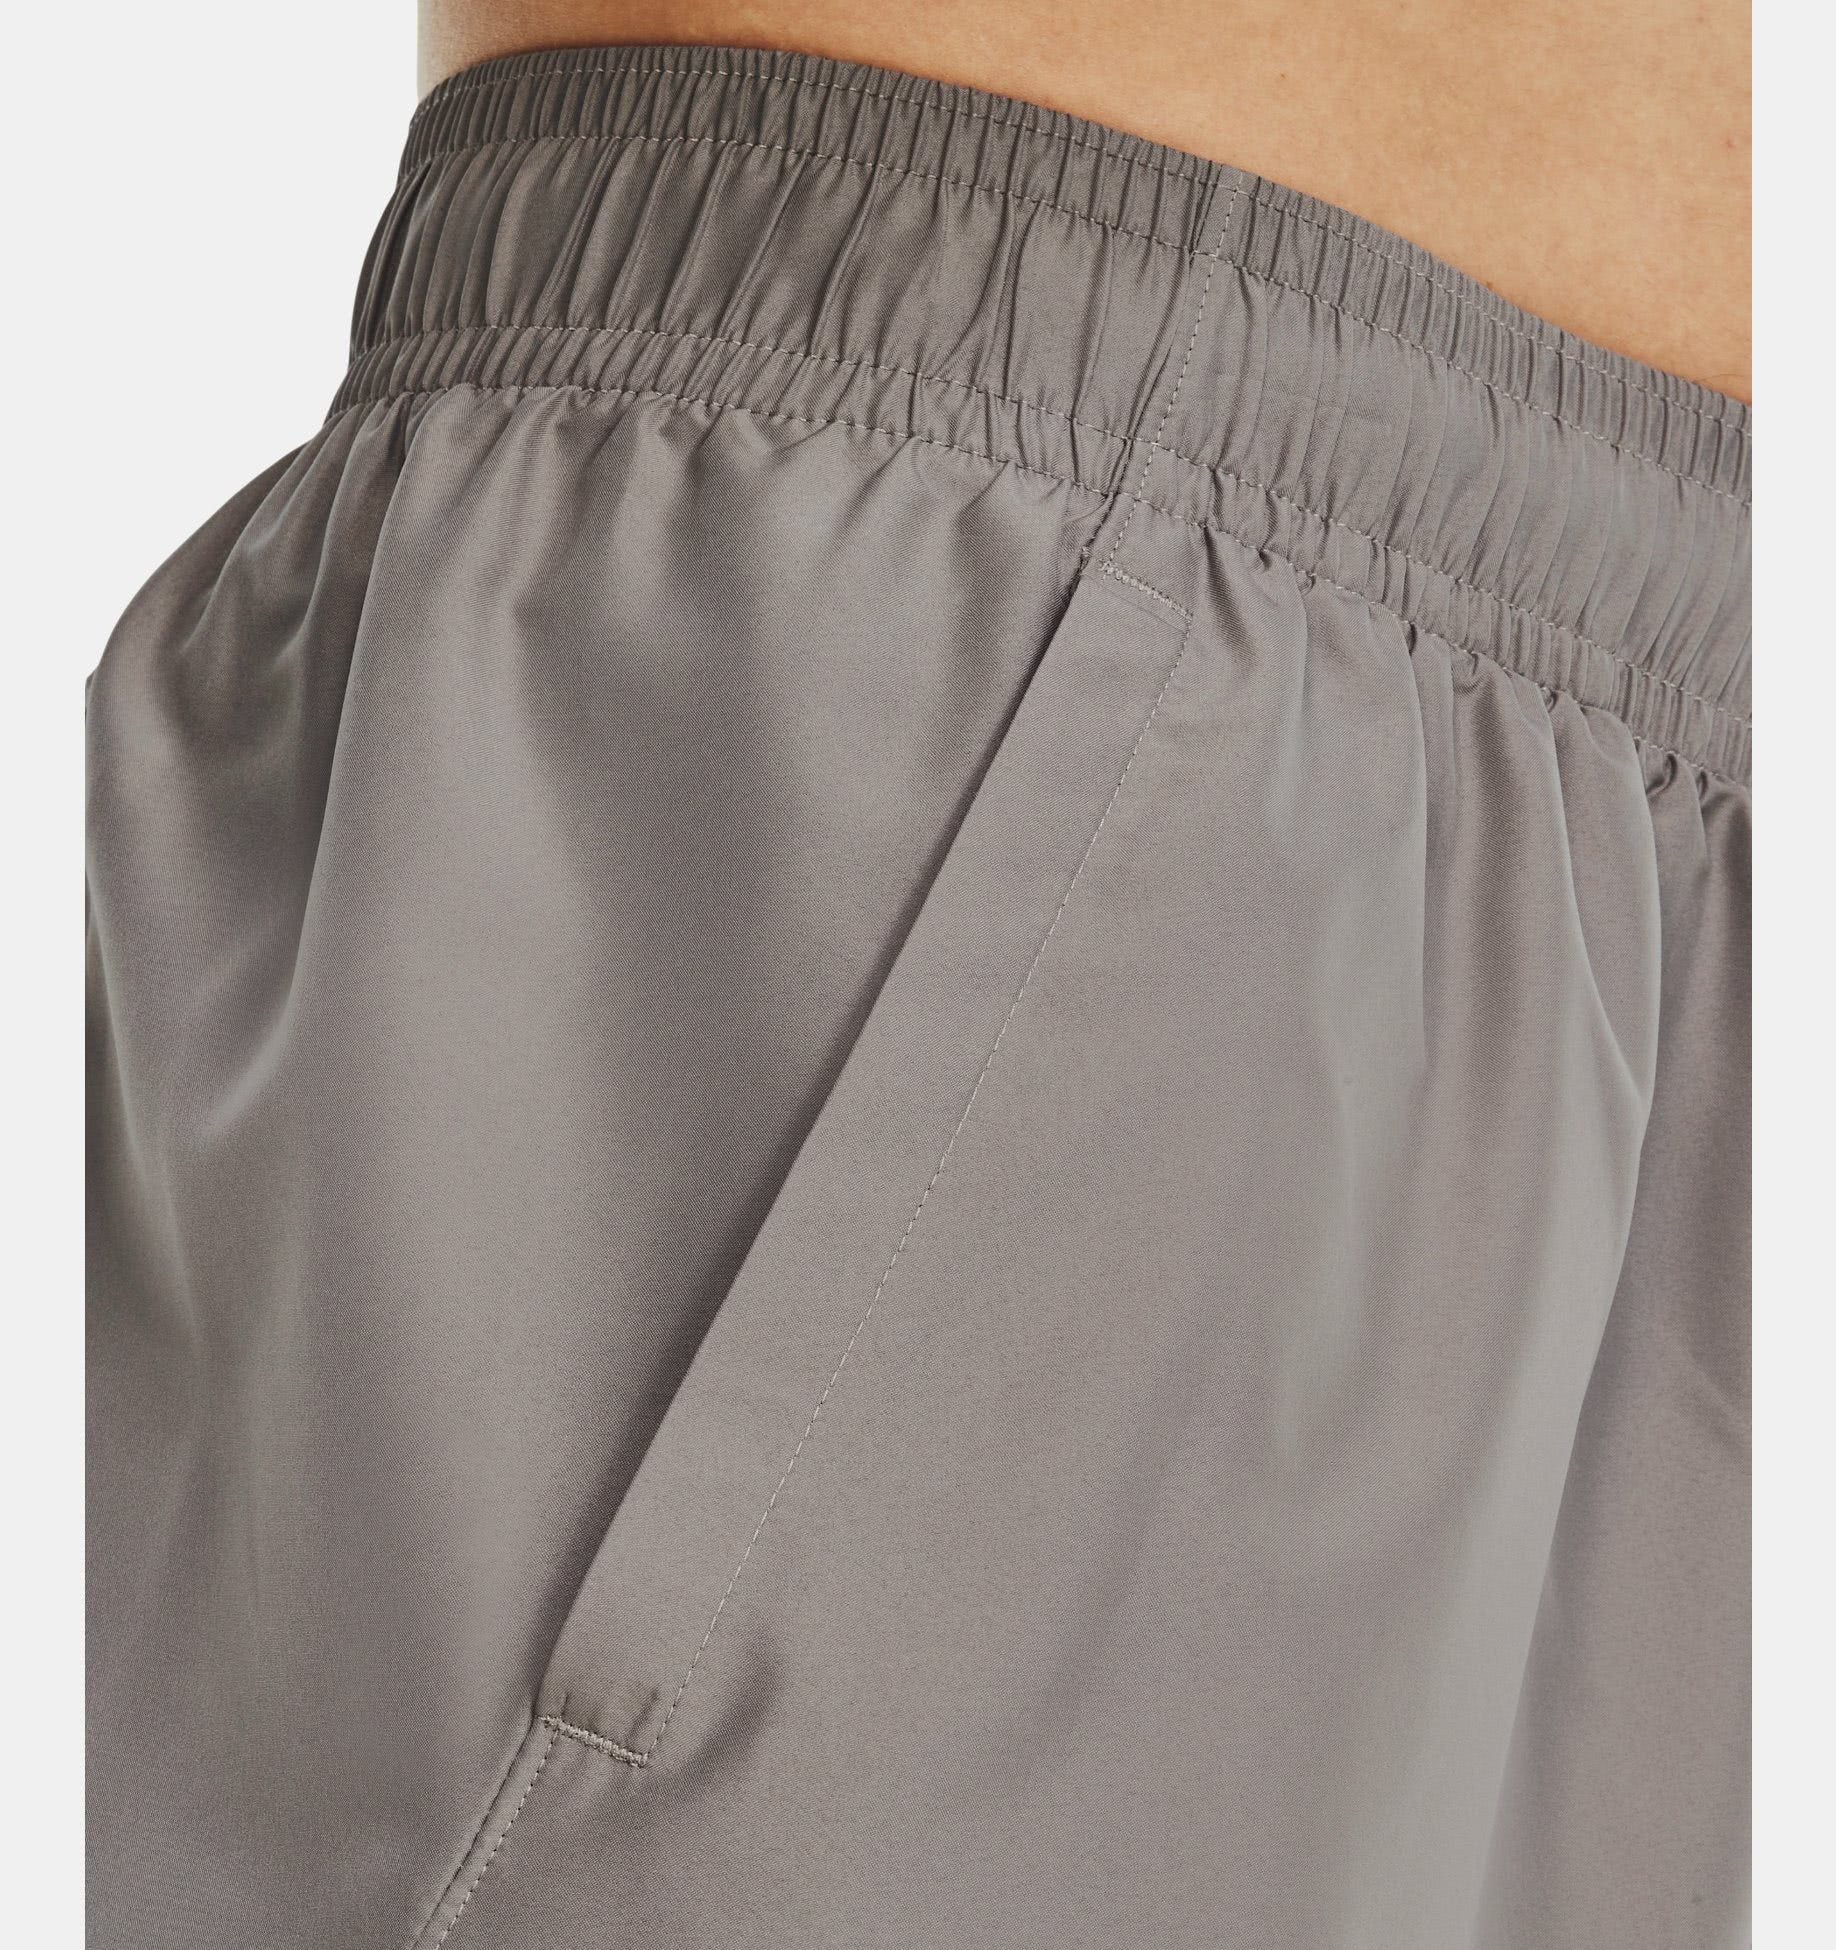 Under Armour UA Woven Graphic Wordmark Shorts 1361433 - Clothing & Accessories